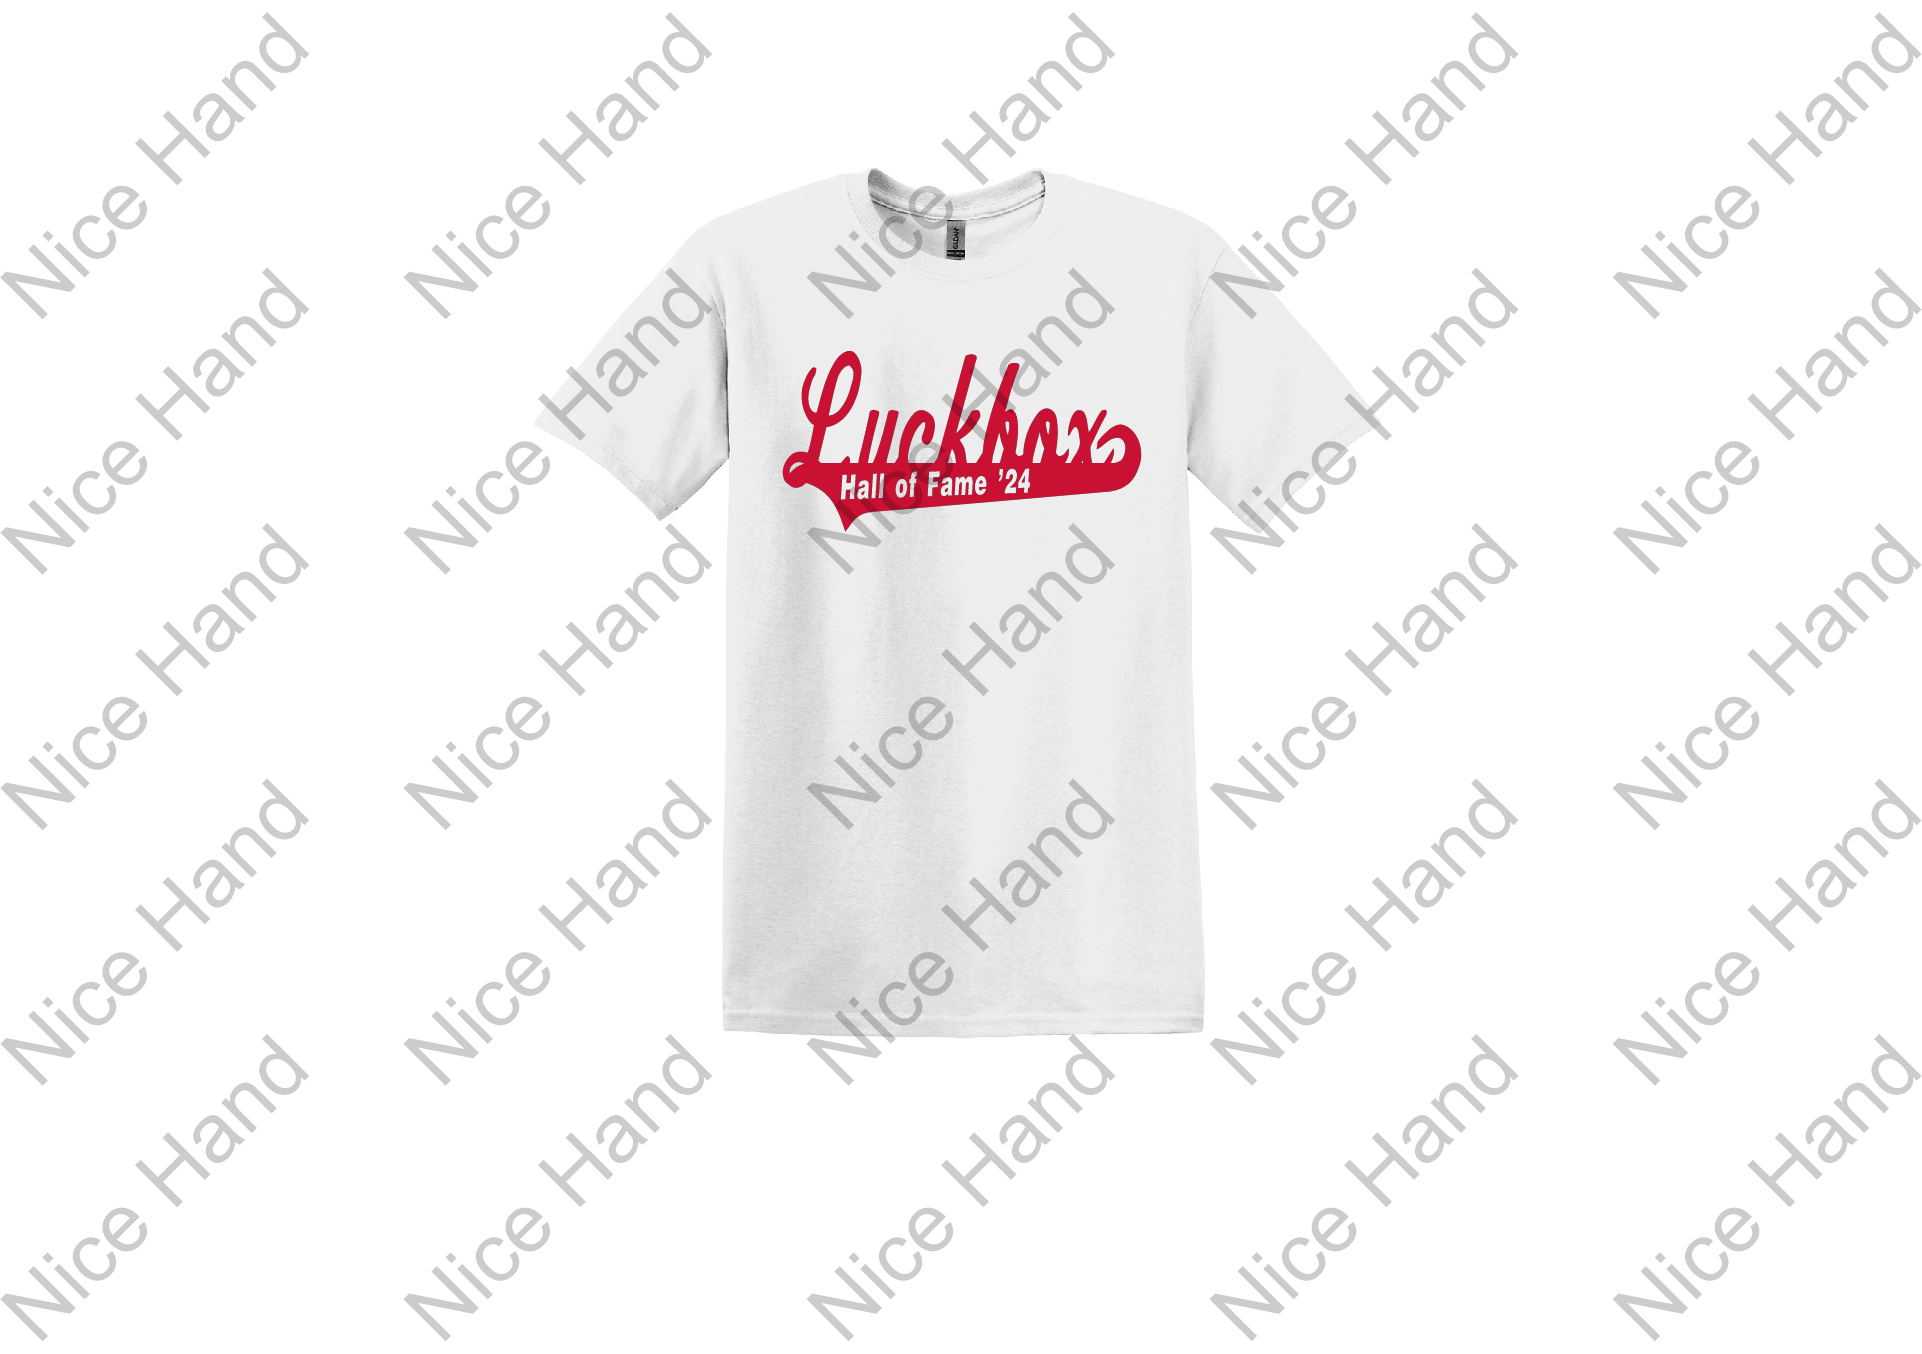 Luckbox hall of fame. White with Red Lettering.